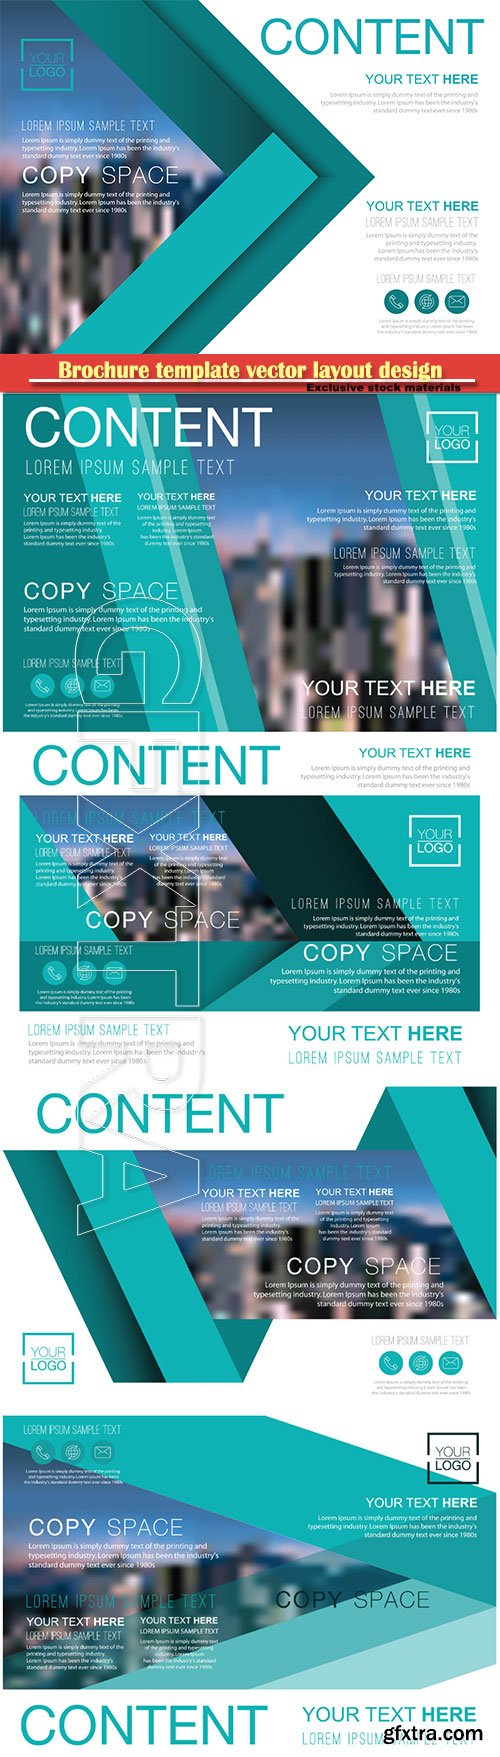 Brochure template vector layout design, corporate business annual report, magazine, flyer mockup # 163